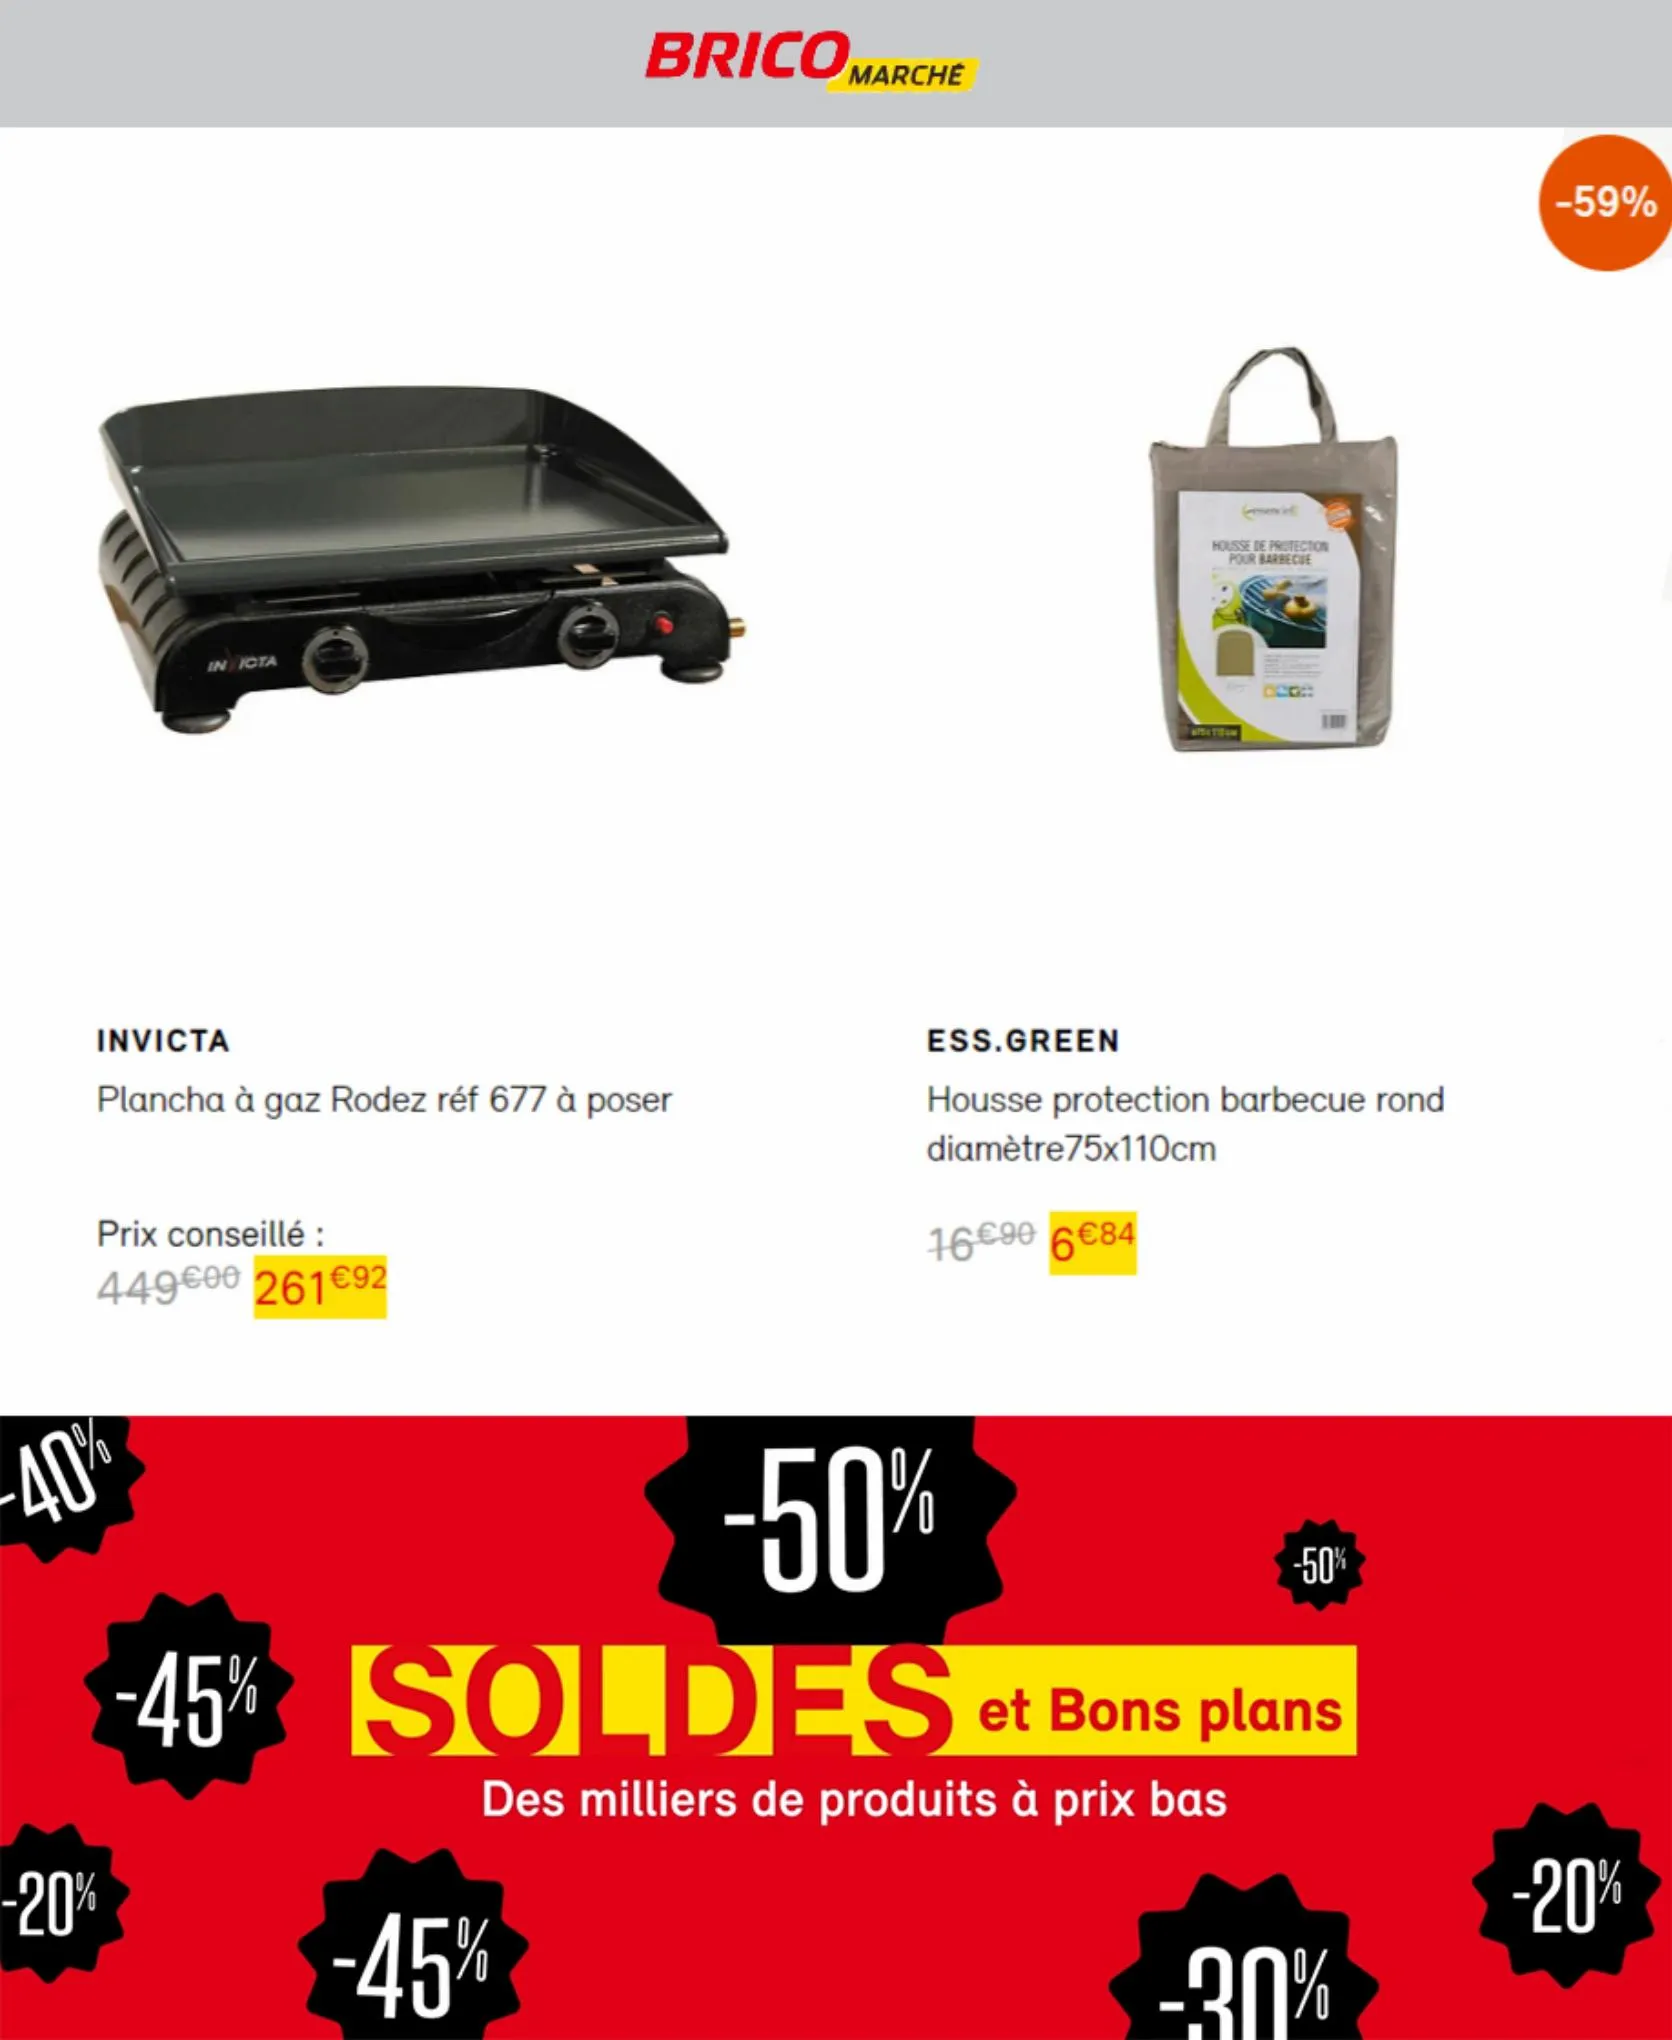 Catalogue Soldes, page 00004